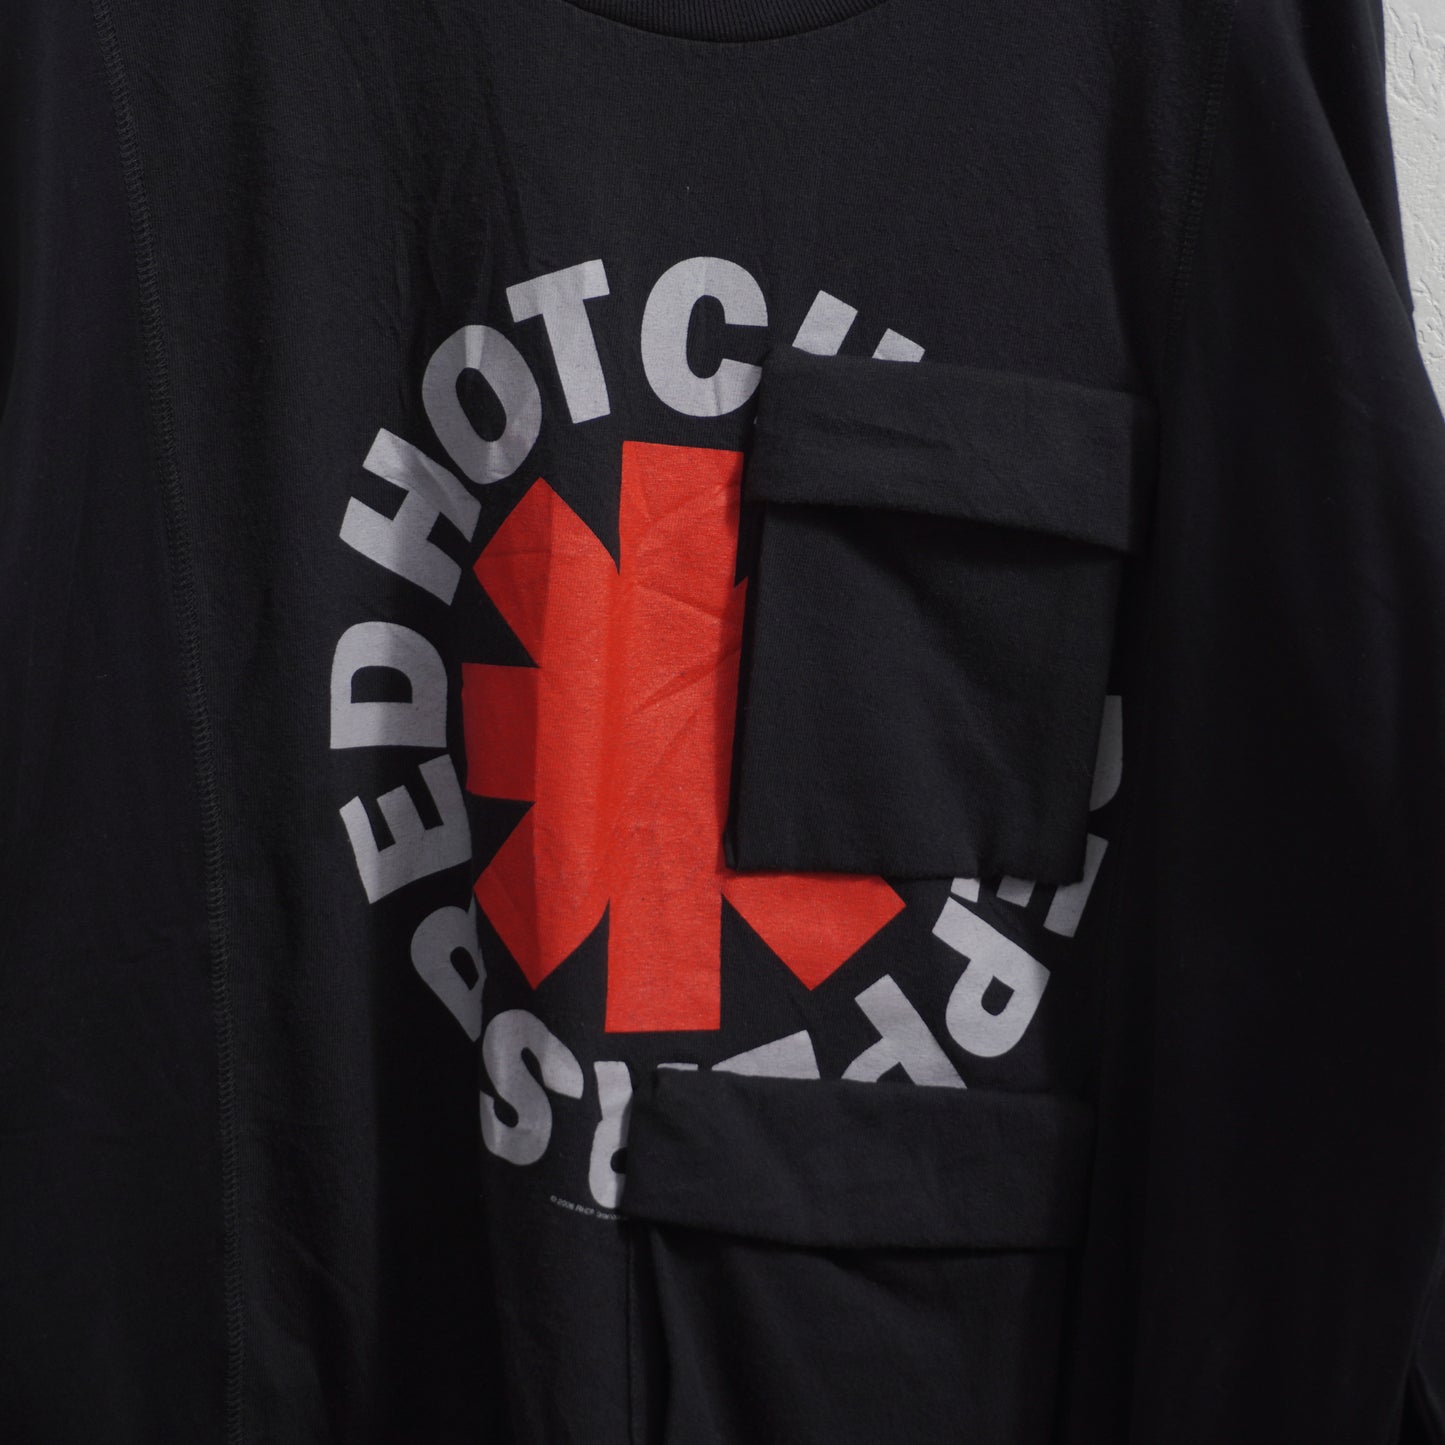 CHANGES Remake Band L/S Tee "Red Hot Chili Peppers"